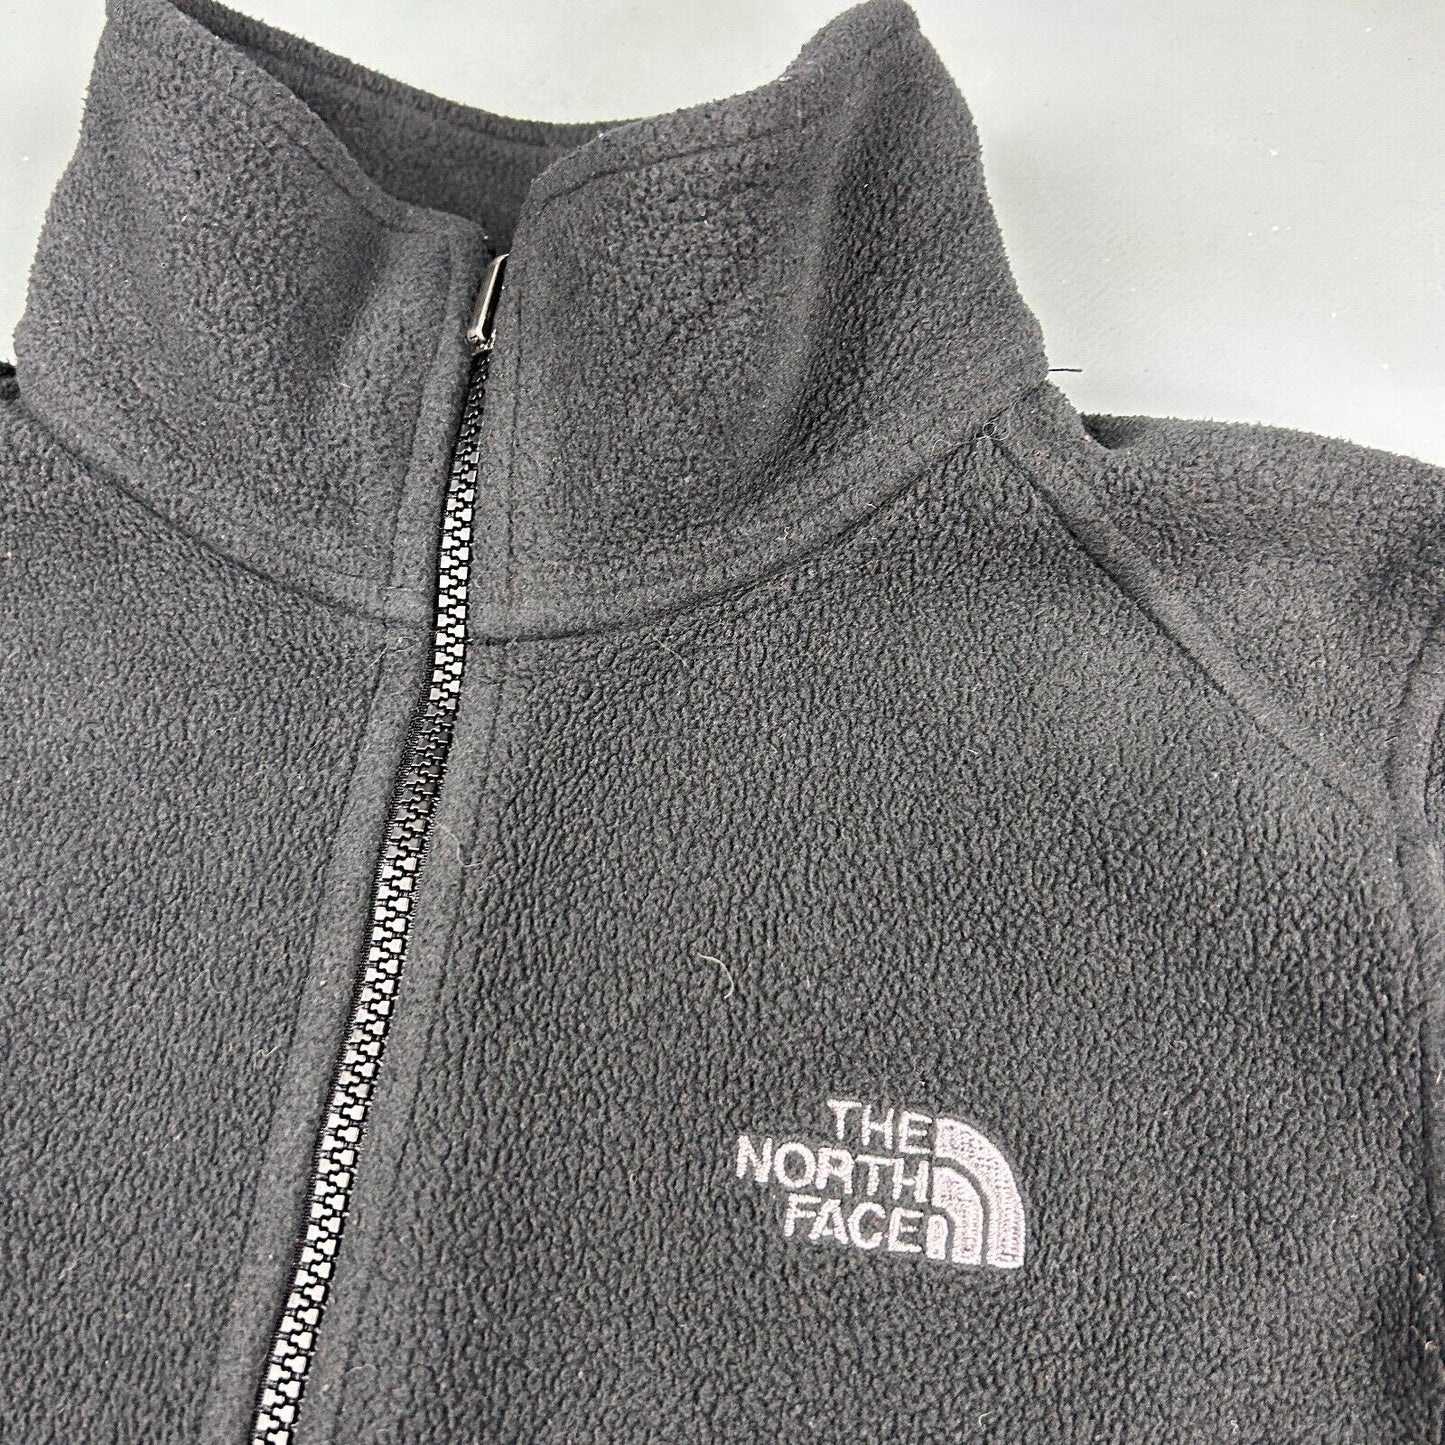 VINTAGE The North Face Black Tech Fleece Sweater sz Small Womens Adult